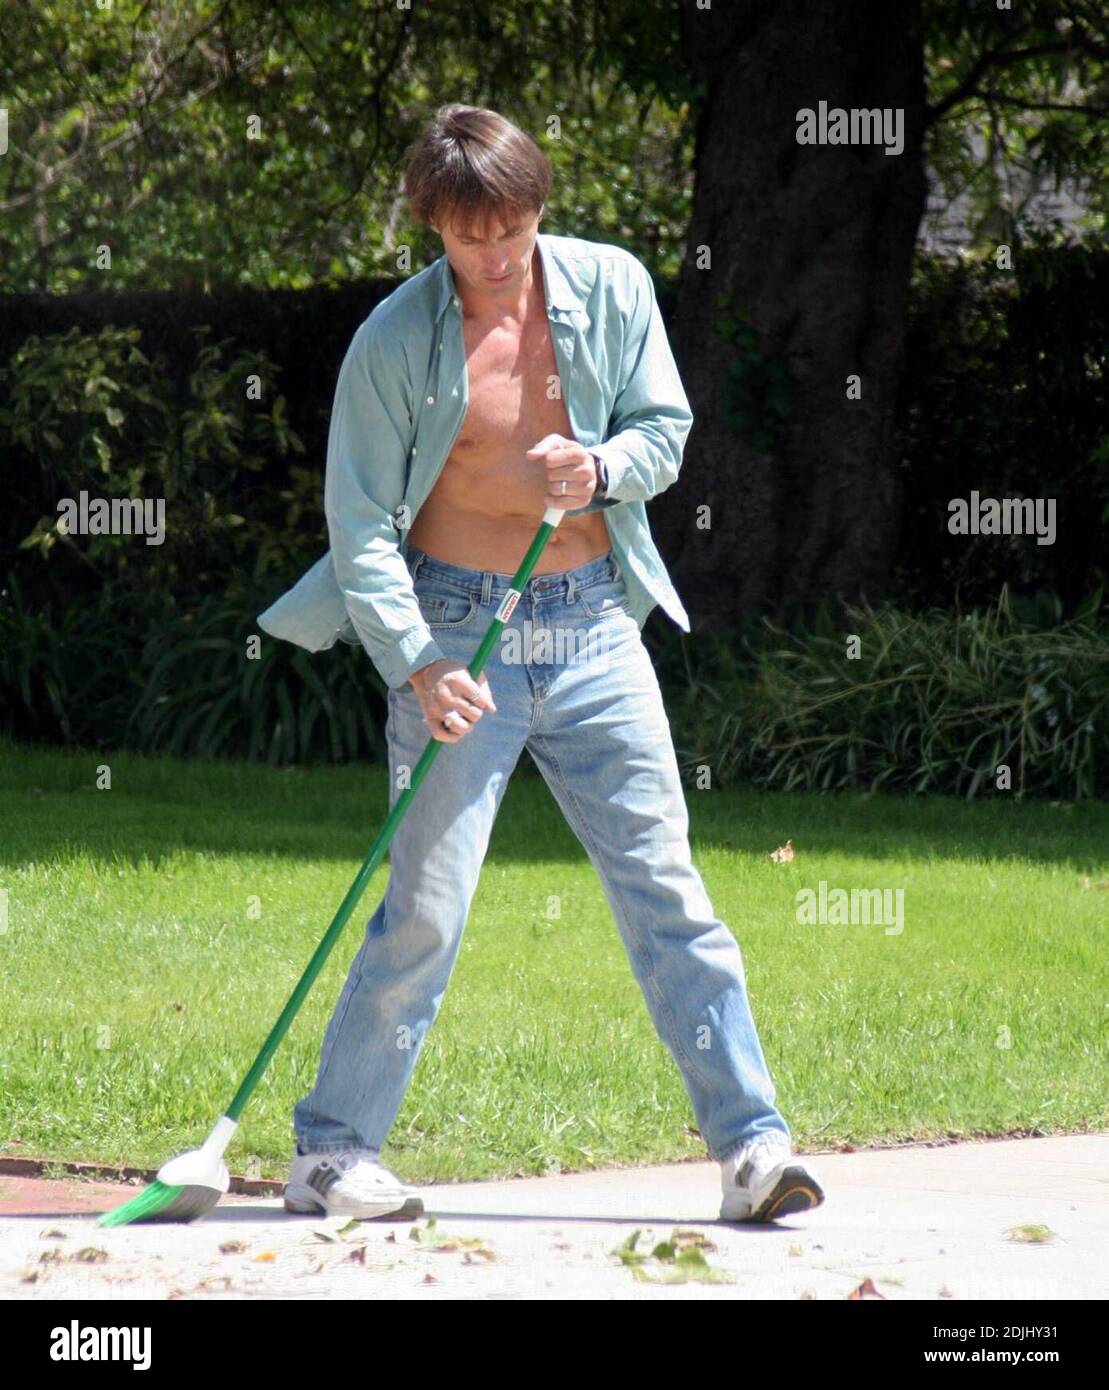 Exclusive!! Actress Marcia Cross seems to have borrowed an idea from her hit TV show 'Desperate Housewives' and hired a hunky gardener. 03/26/05 [[sac]] Stock Photo